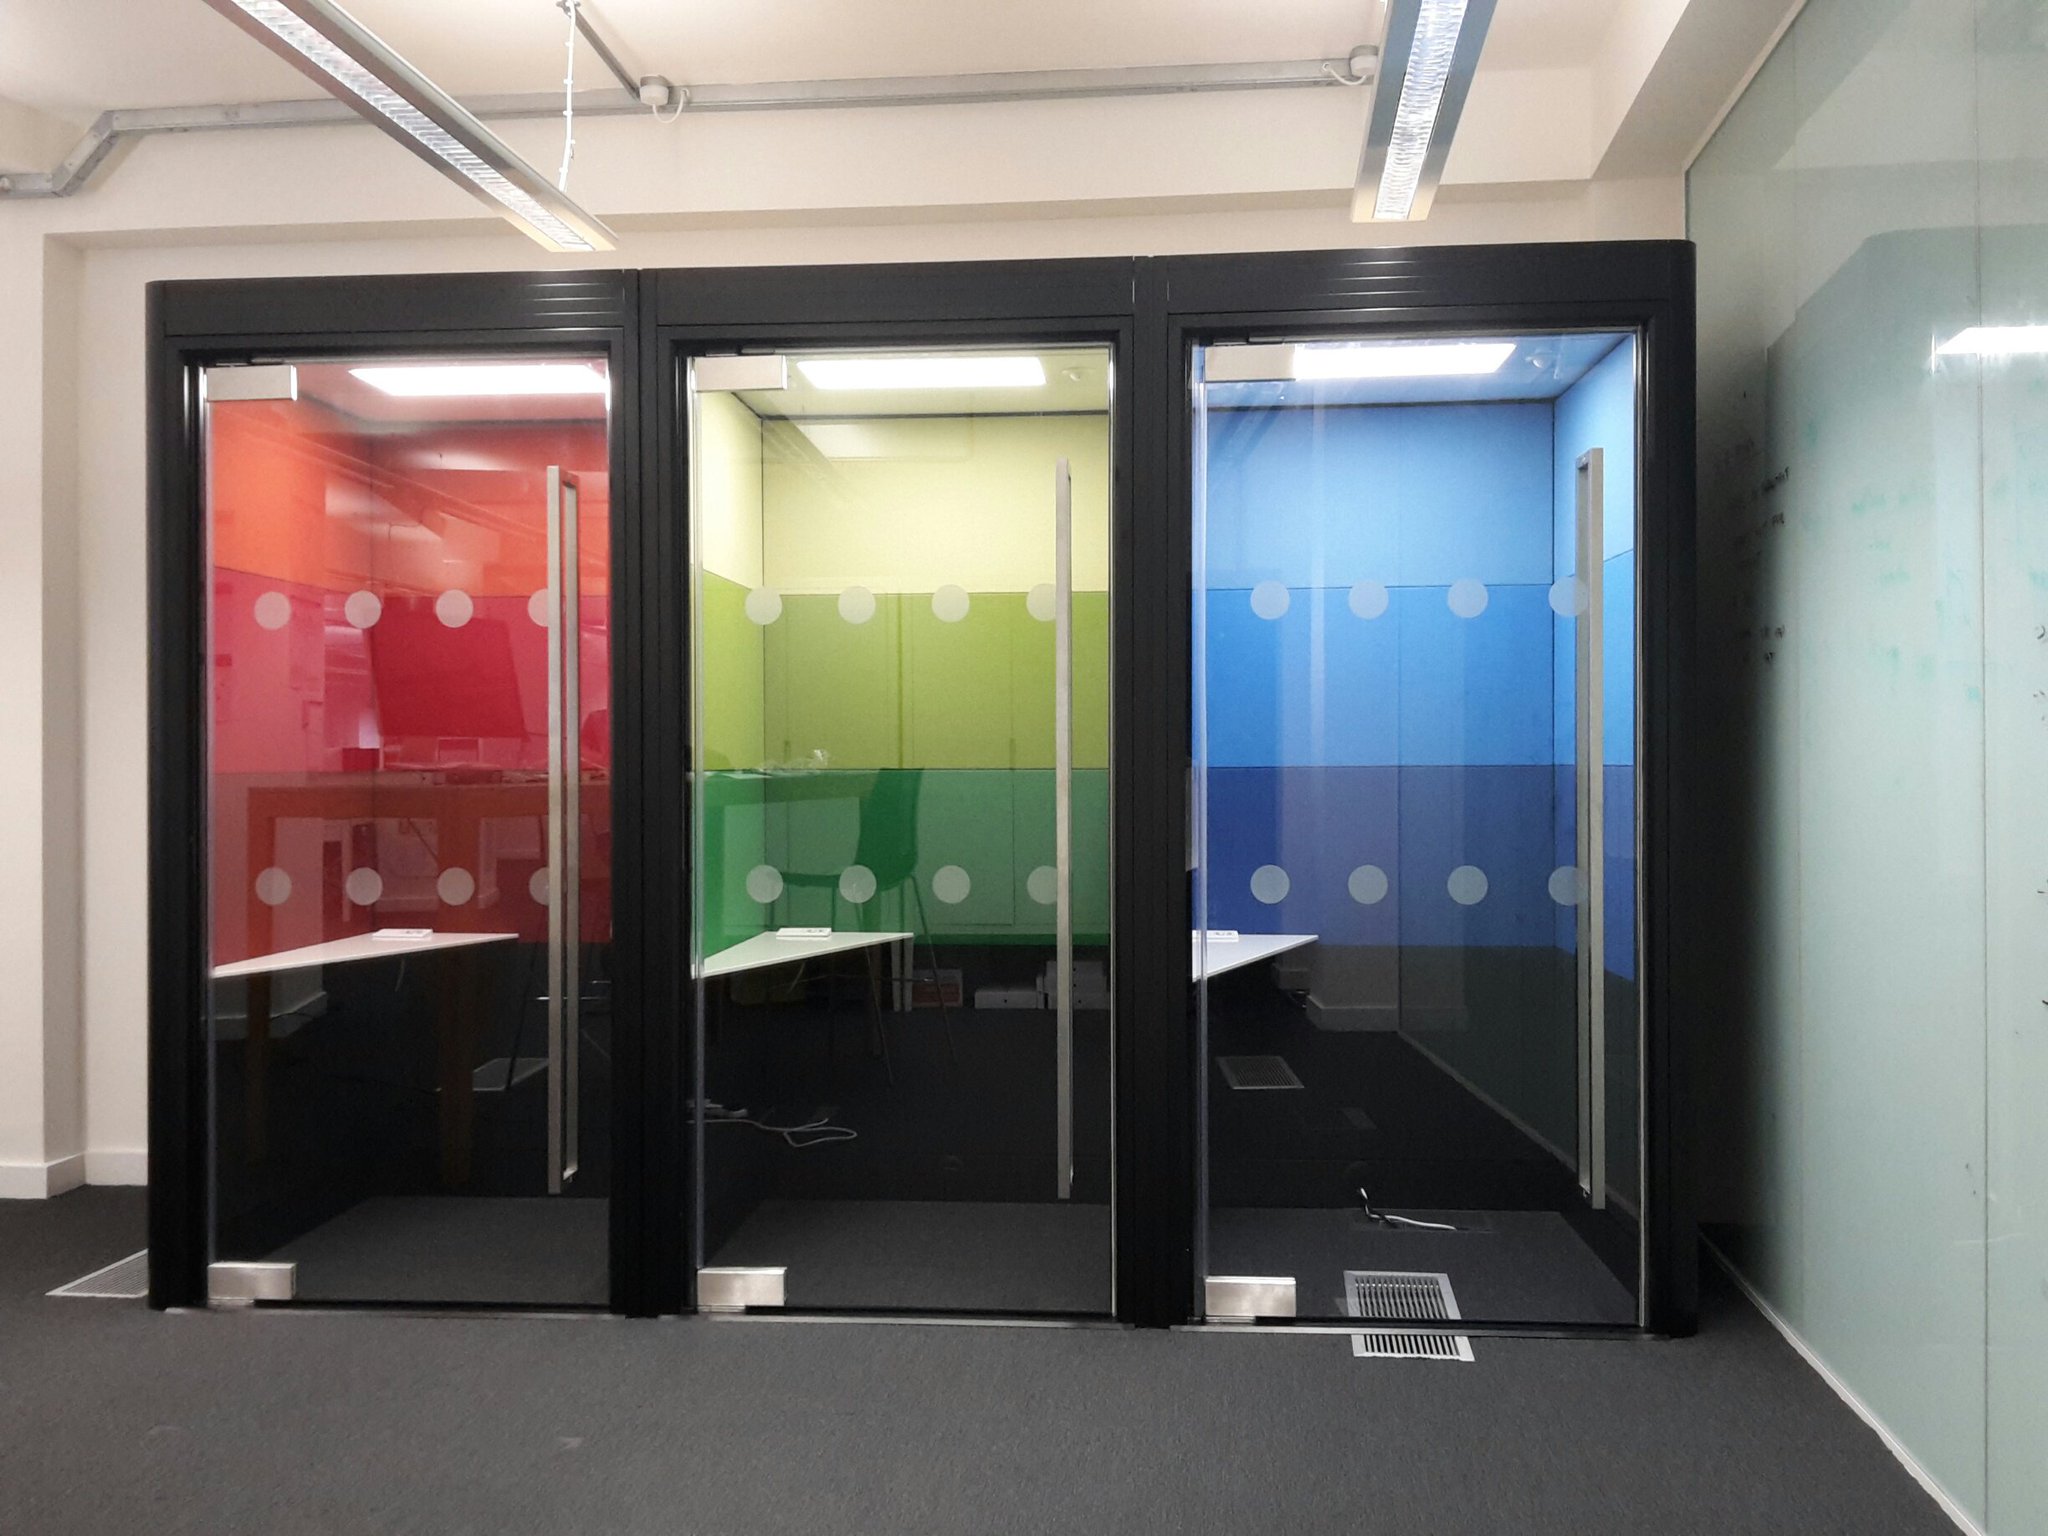 Après Furniture on Twitter: "Spacio Linked Office Phone Booths: 95%